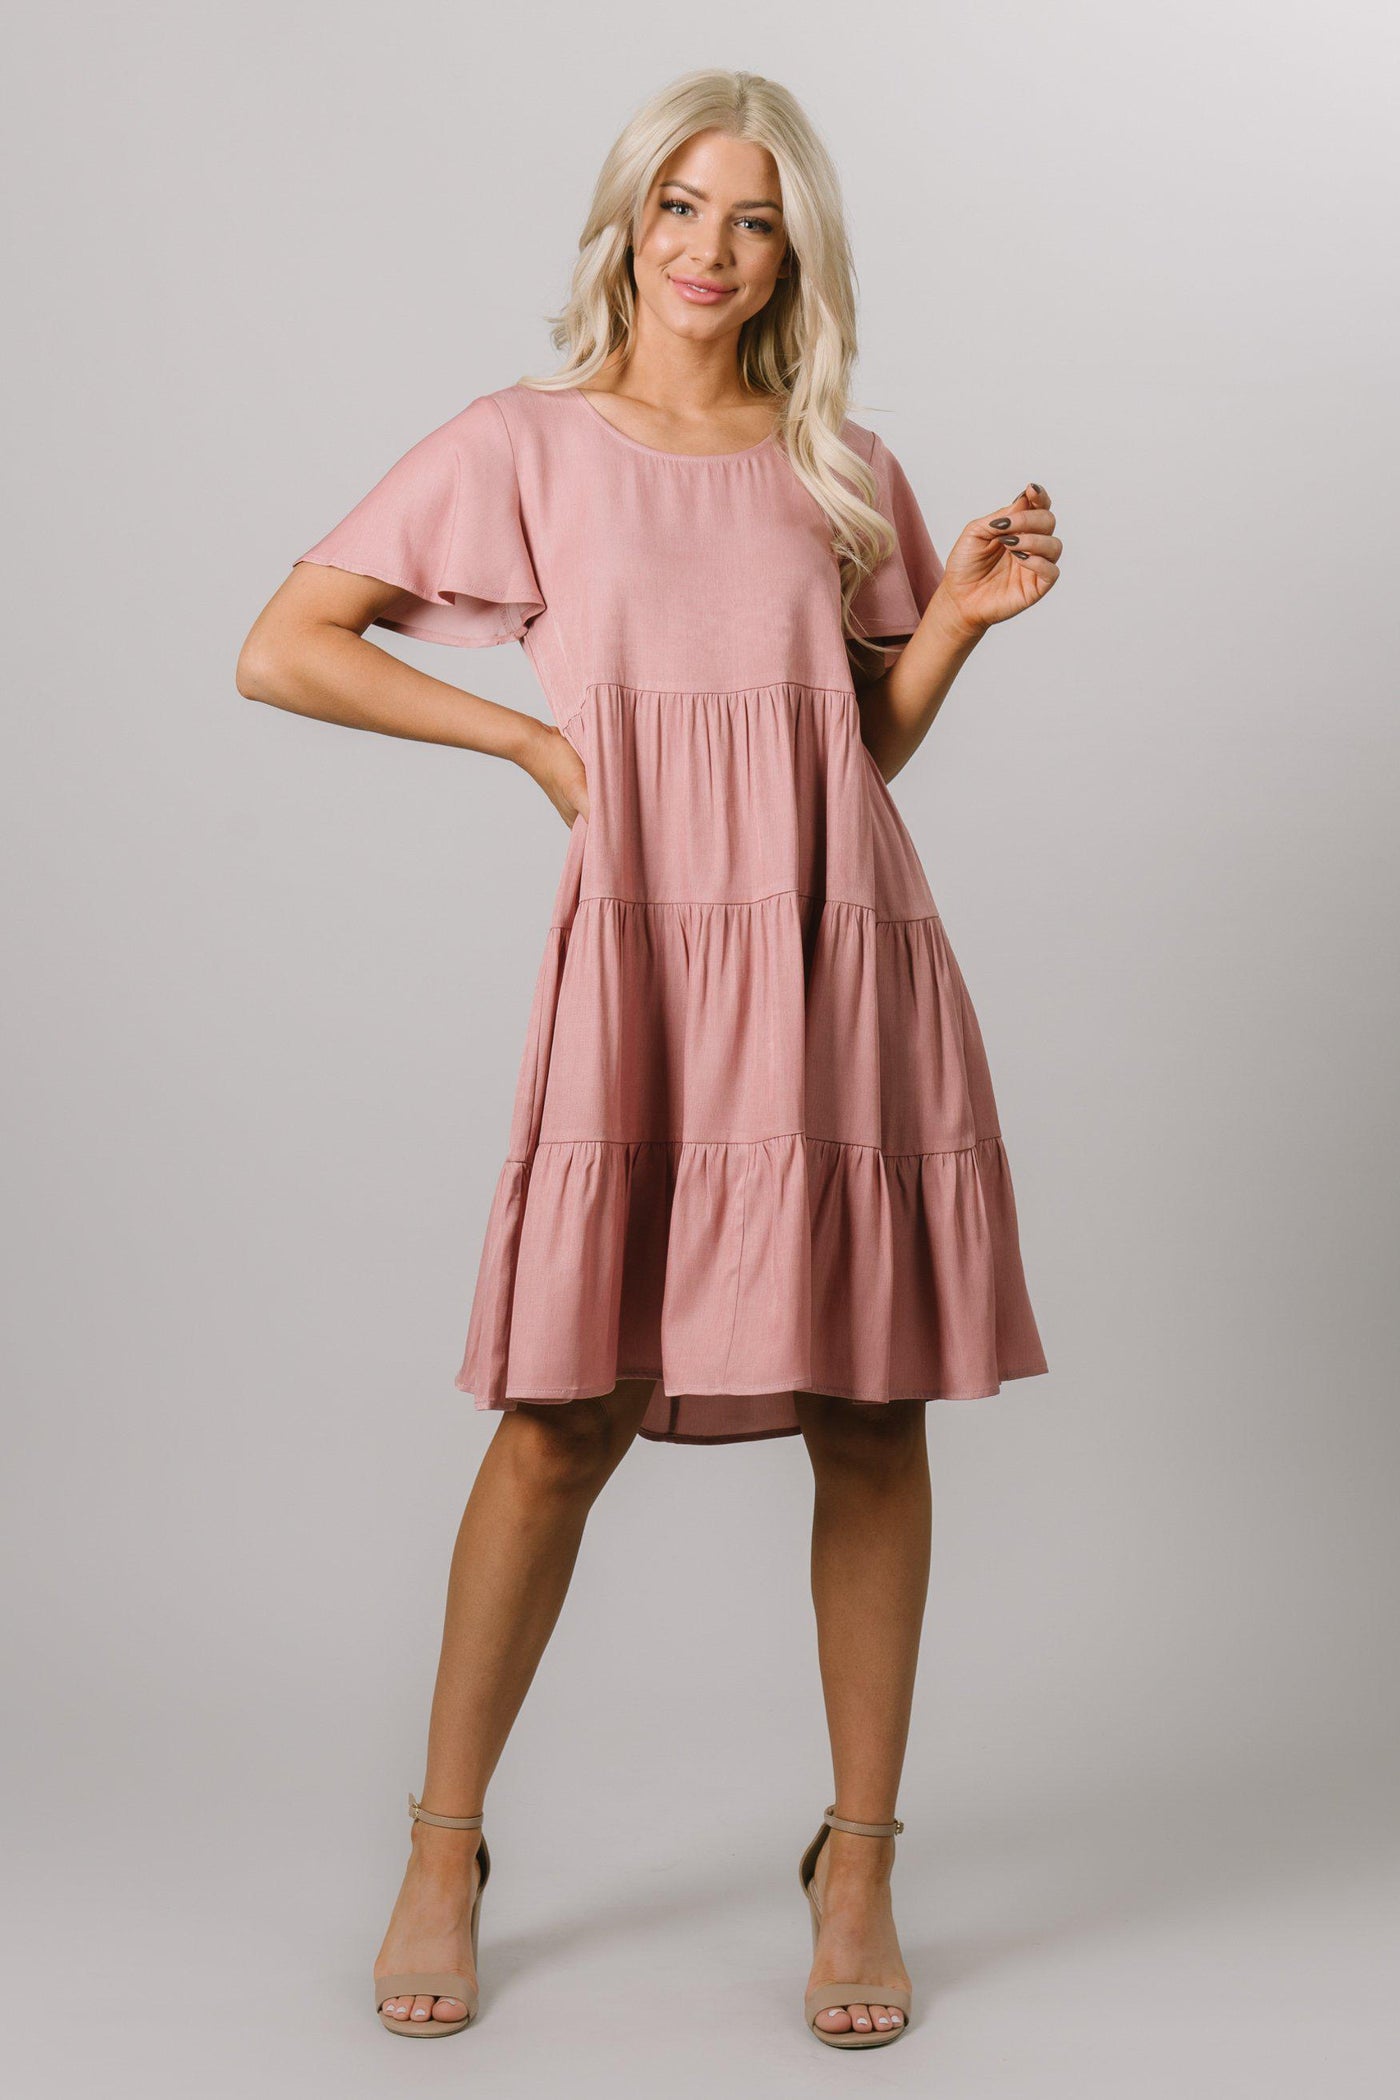 Modest Dresses - Modest Clothing - Everyday Modest Dresses - Bridesmaid Modest Dresses This Dusty Pink swing knee length dress has tiers and a scoop neck with flutter sleeves.